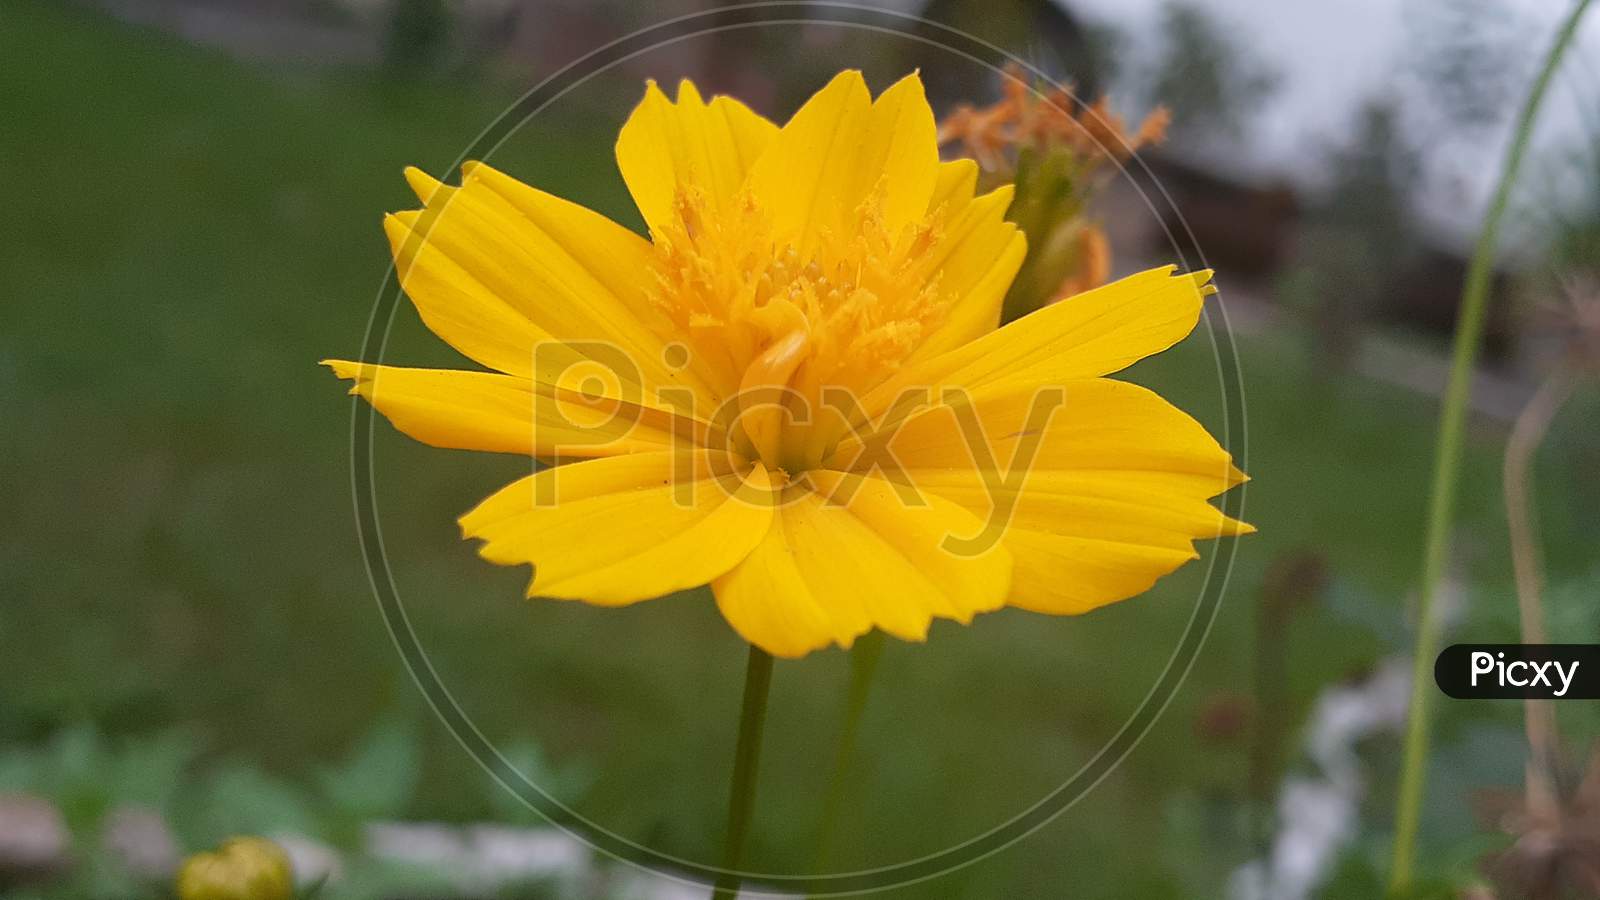 Coreopsis is a genus of flowering plants in the family Asteraceae. Common names include calliopsis and tickseeds, a name shared with various other plants.